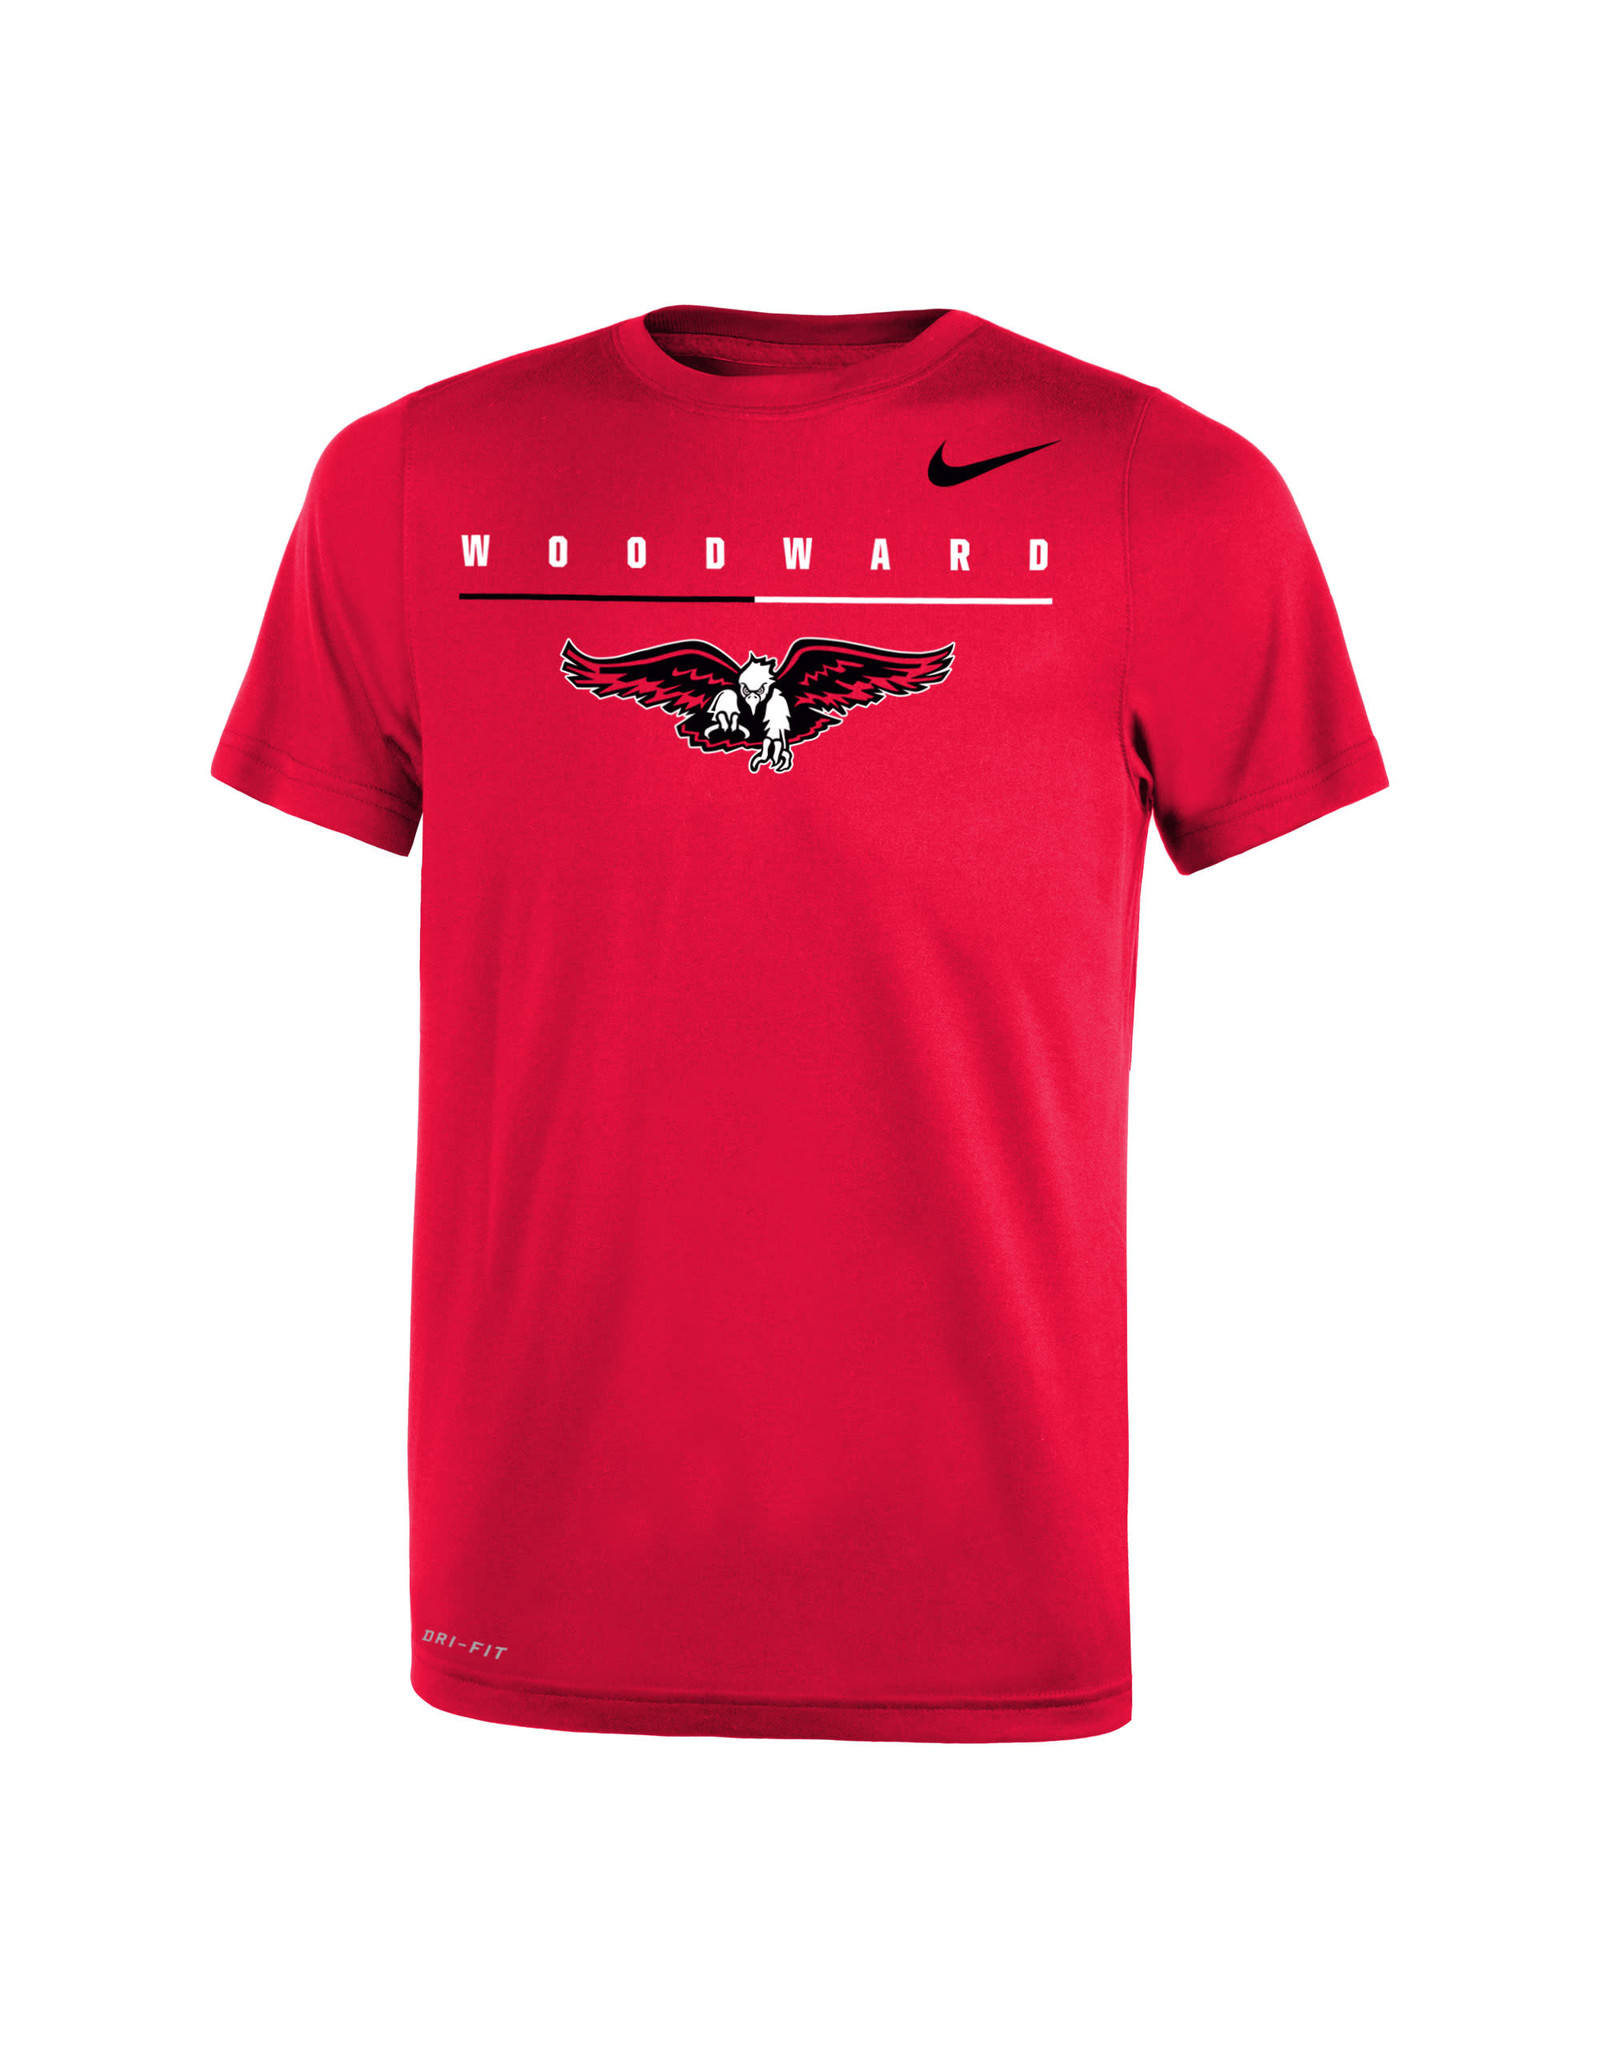 NIKE Youth Legend SS Tee in Red by NIKE